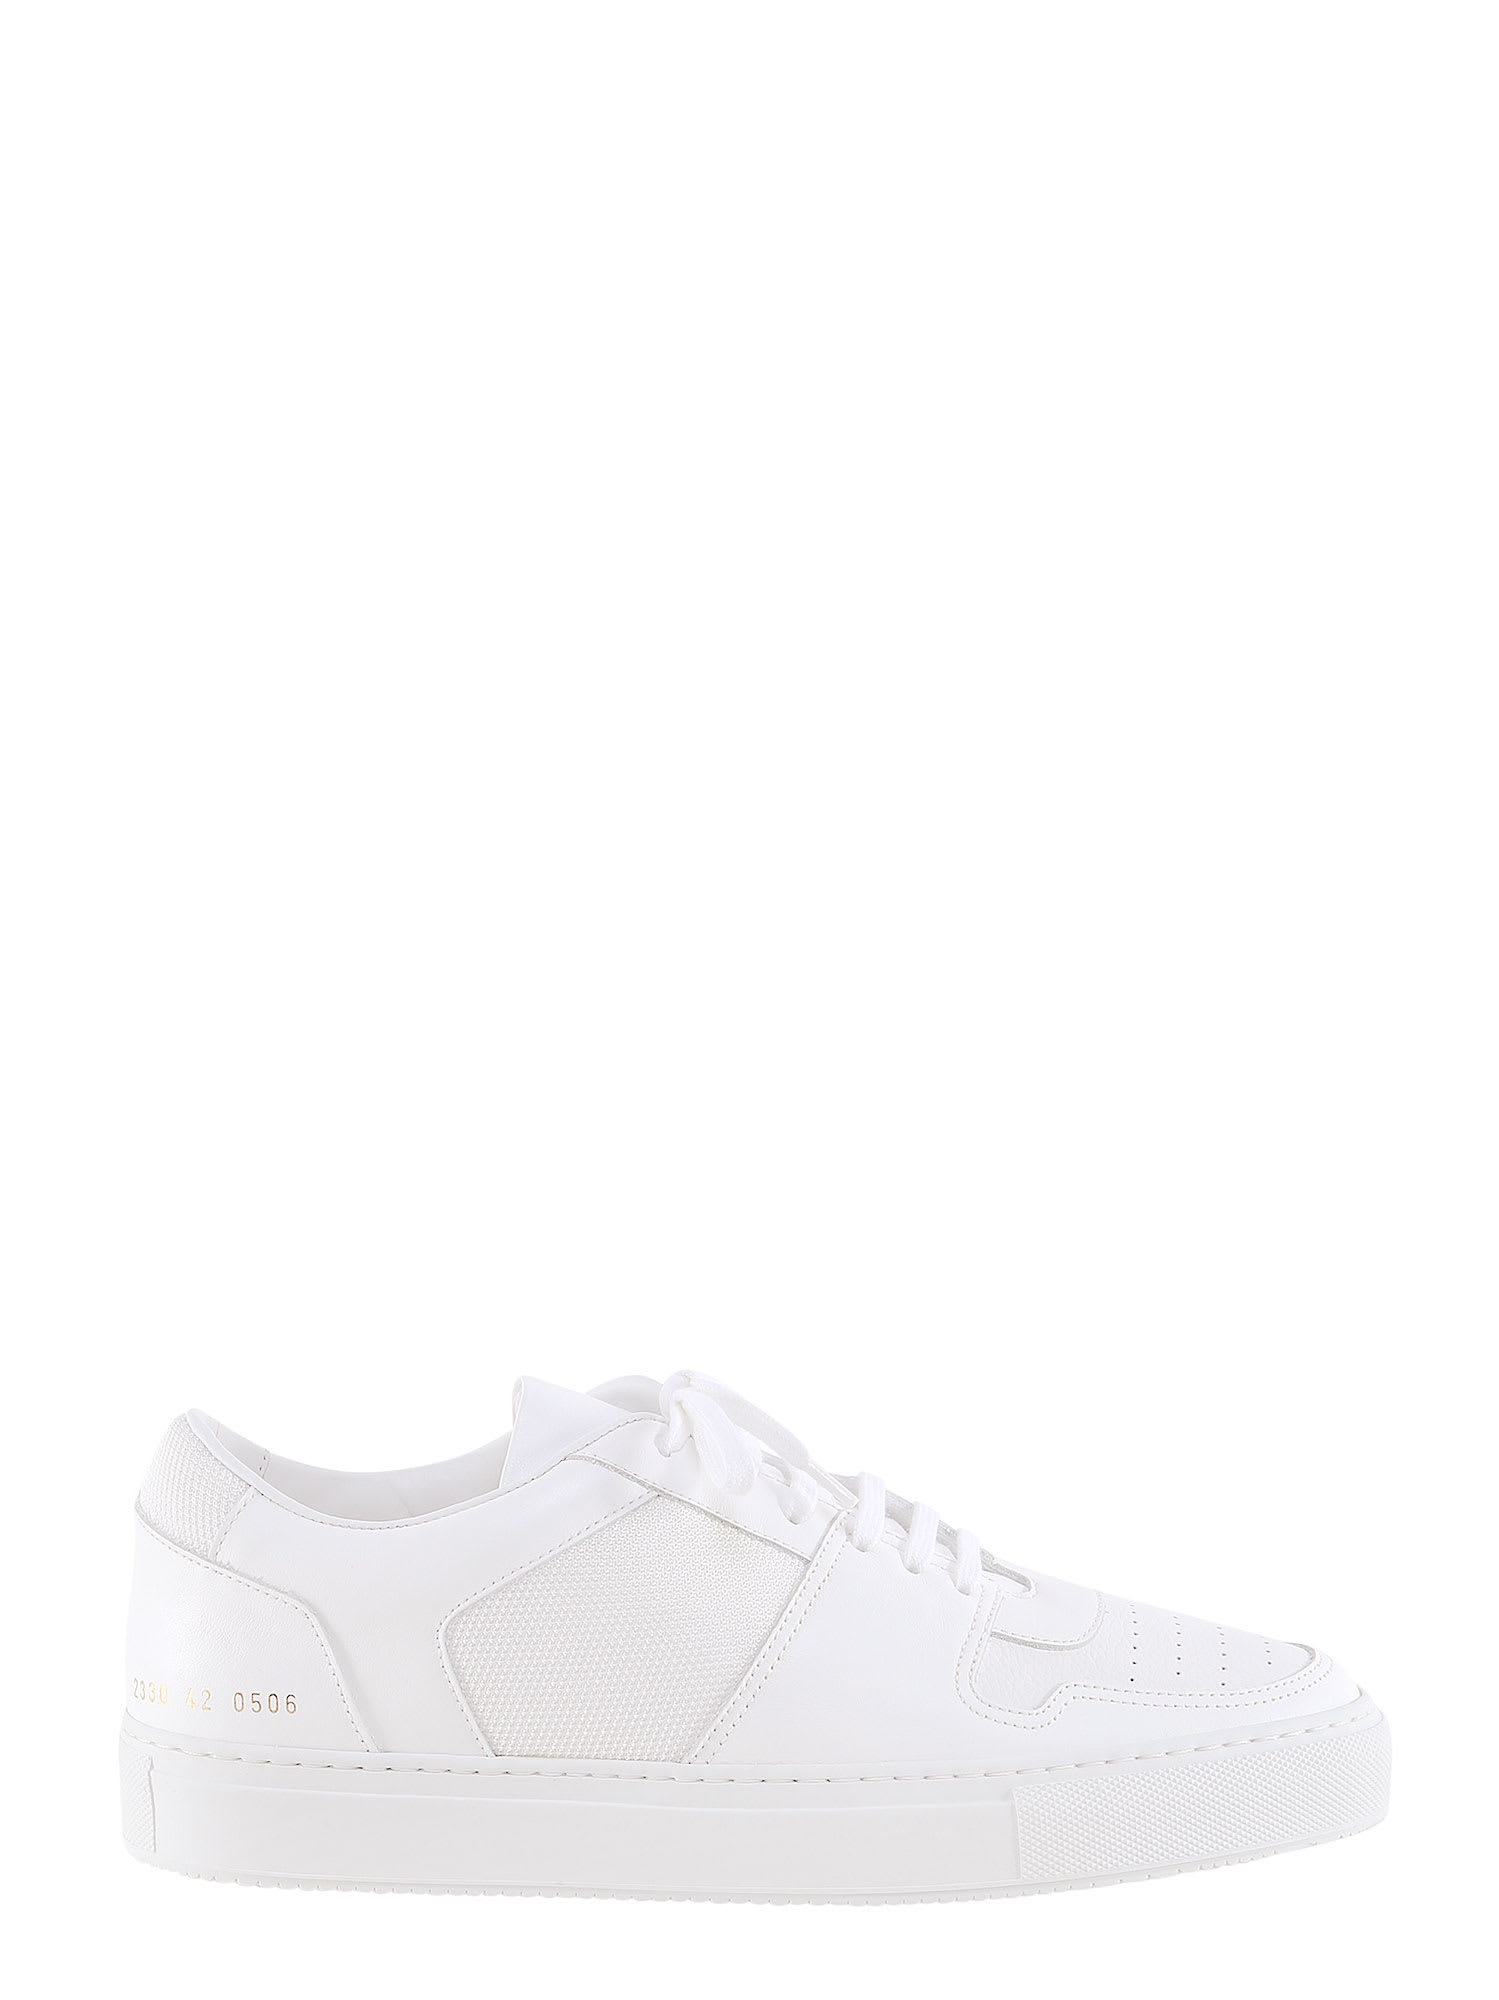 Common Projects Decades Sneakers